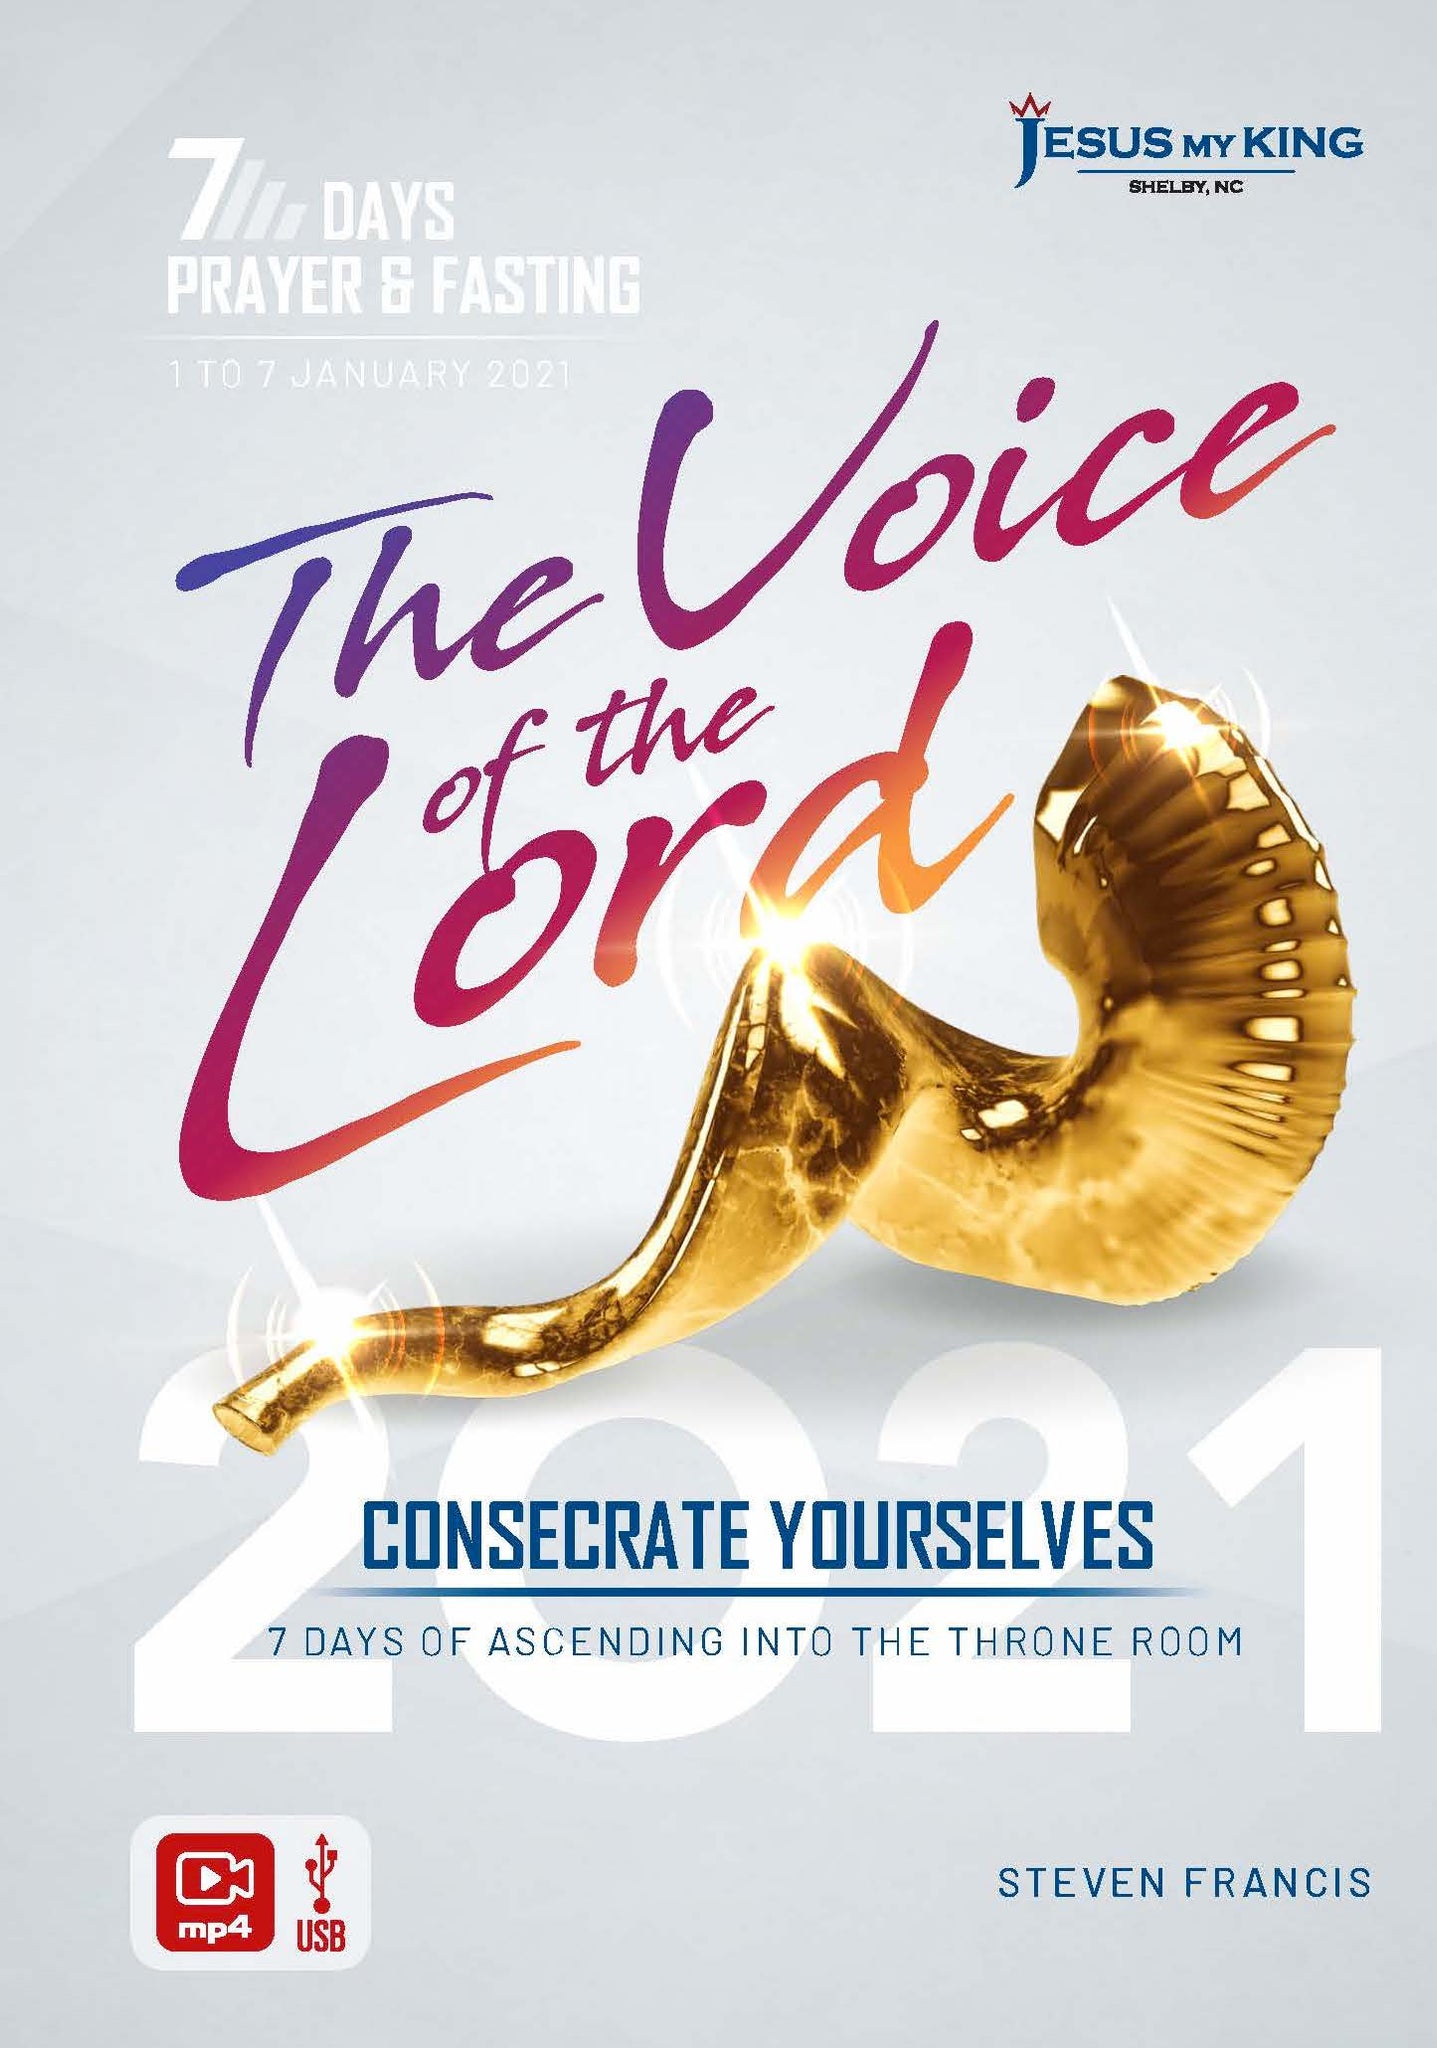 The Voice Of The Lord 2021 (Digital Video) - Steven Francis Ministries 